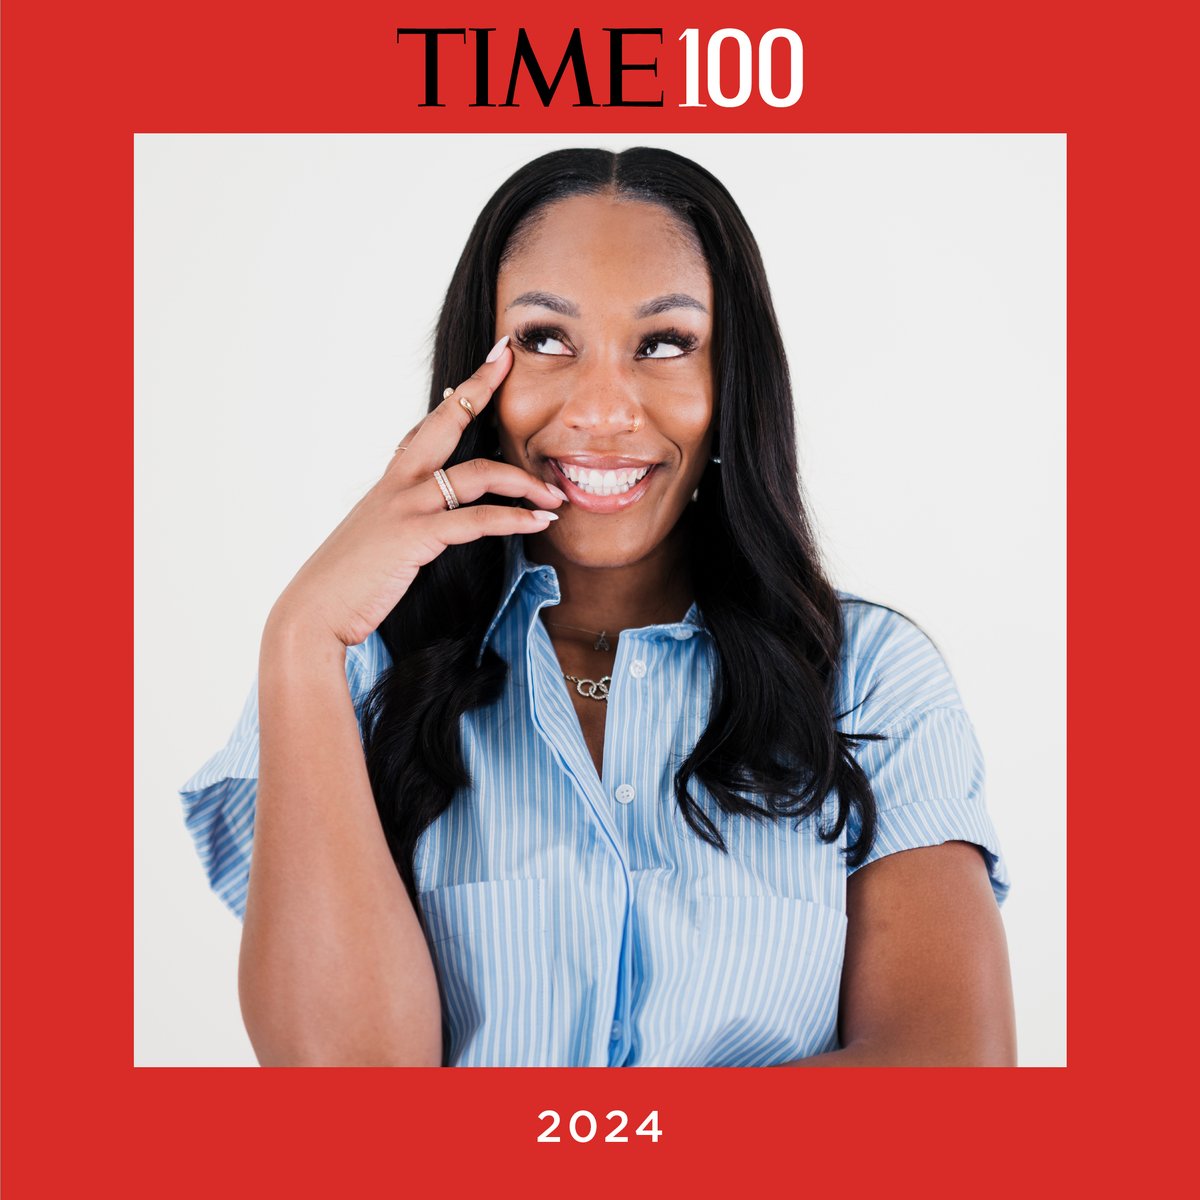 TOP TIER ✨ @TIME's list of the 100 Most Influential People in the world! Congratulations, @_ajawilson22! time.com/time100